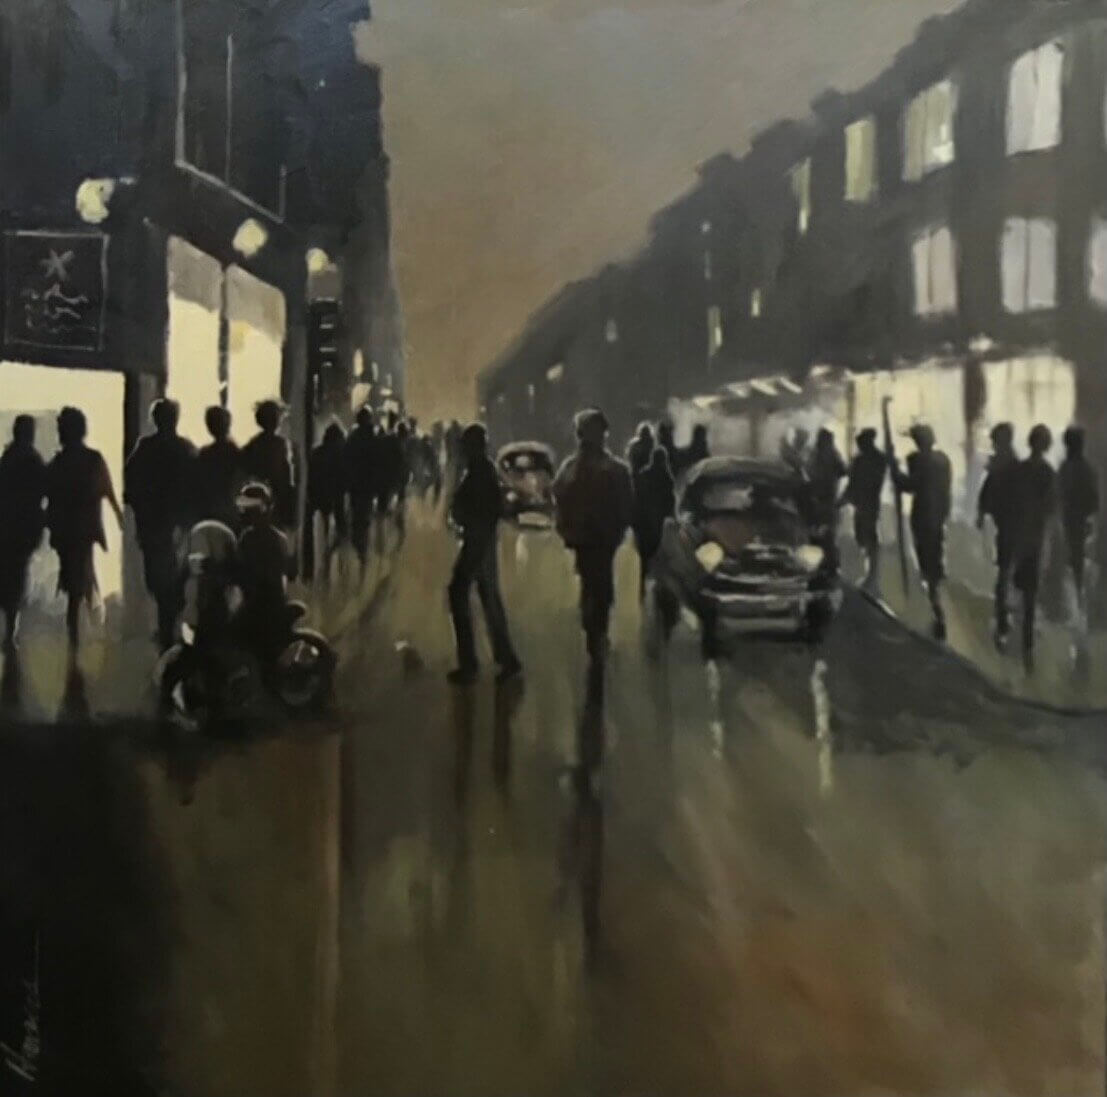 Urban Night Life by Betsy Havens at LePrince Galleries